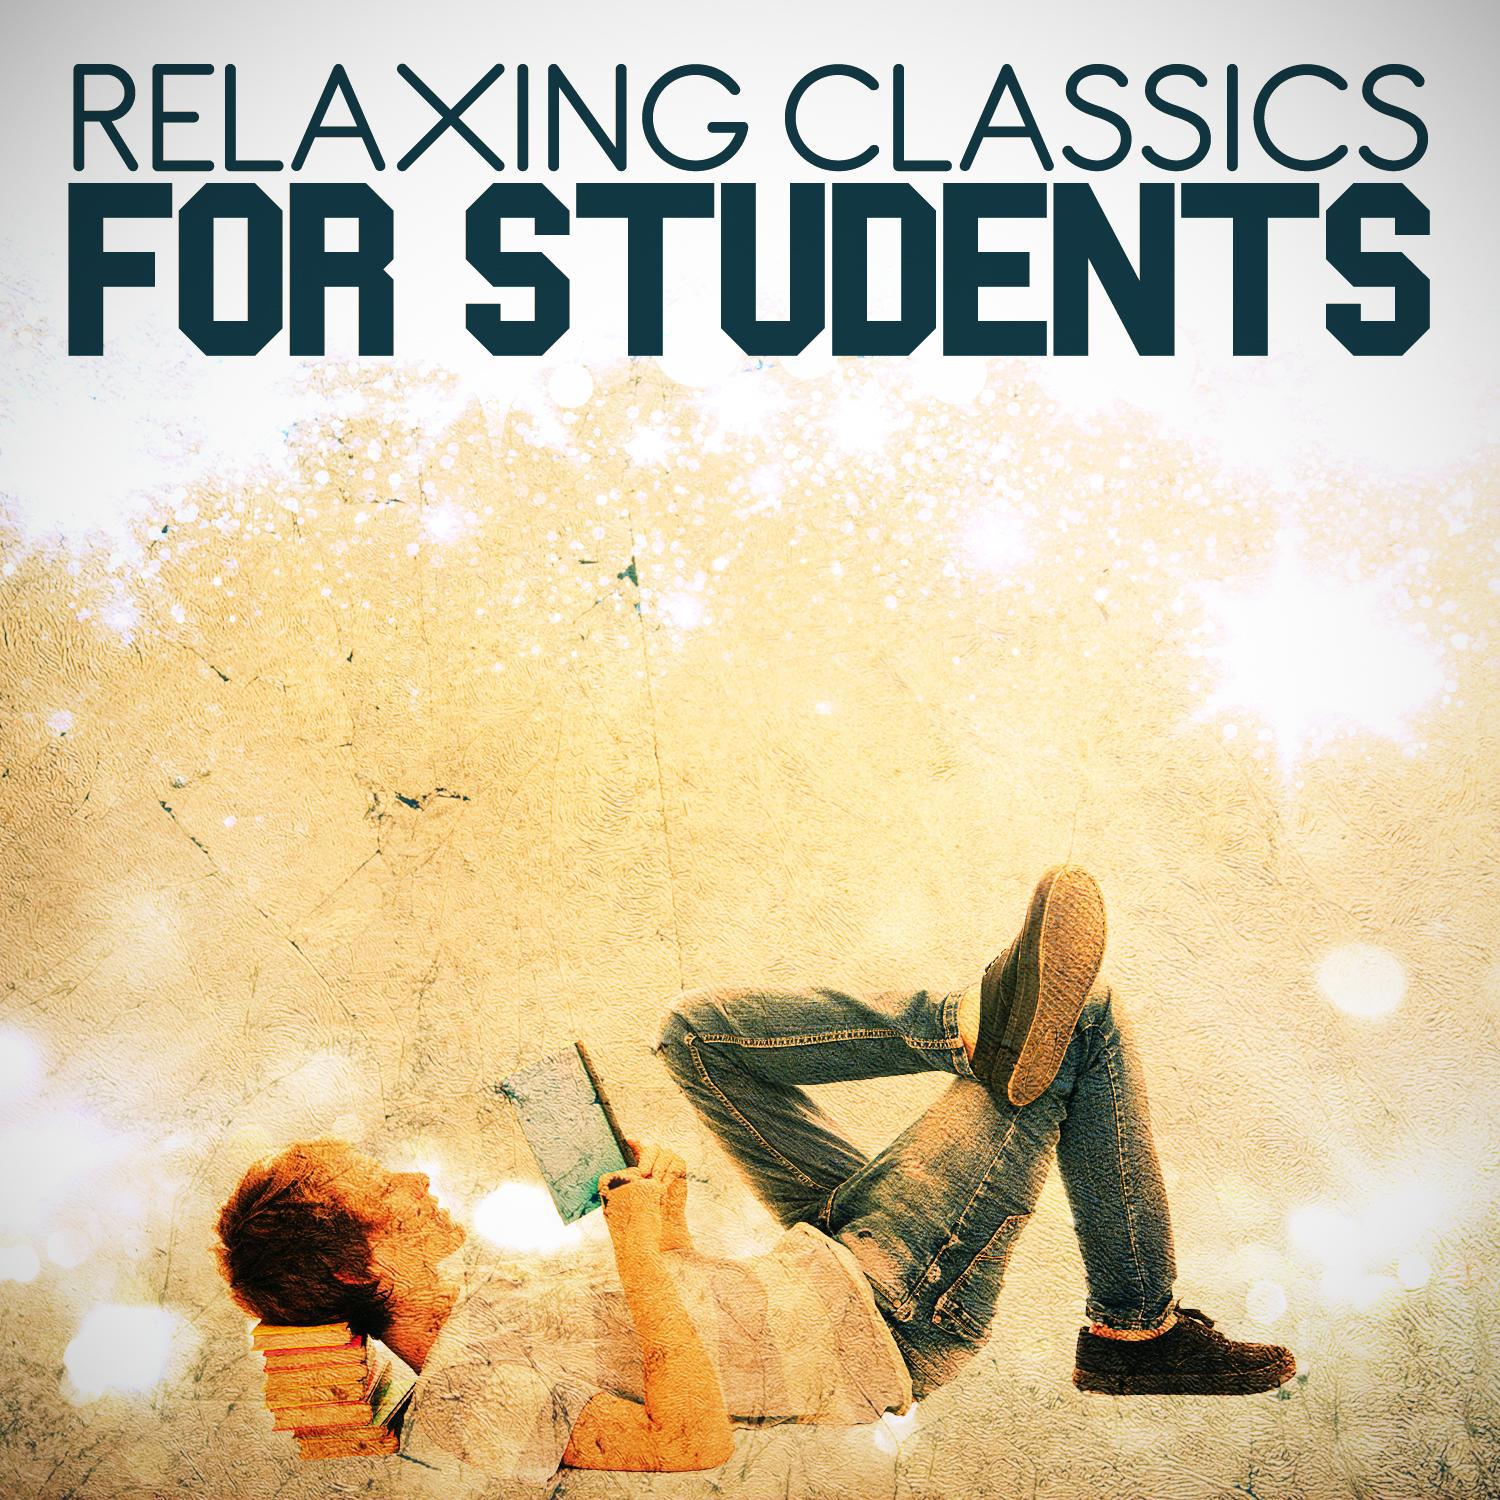 Relaxing Classics for Students